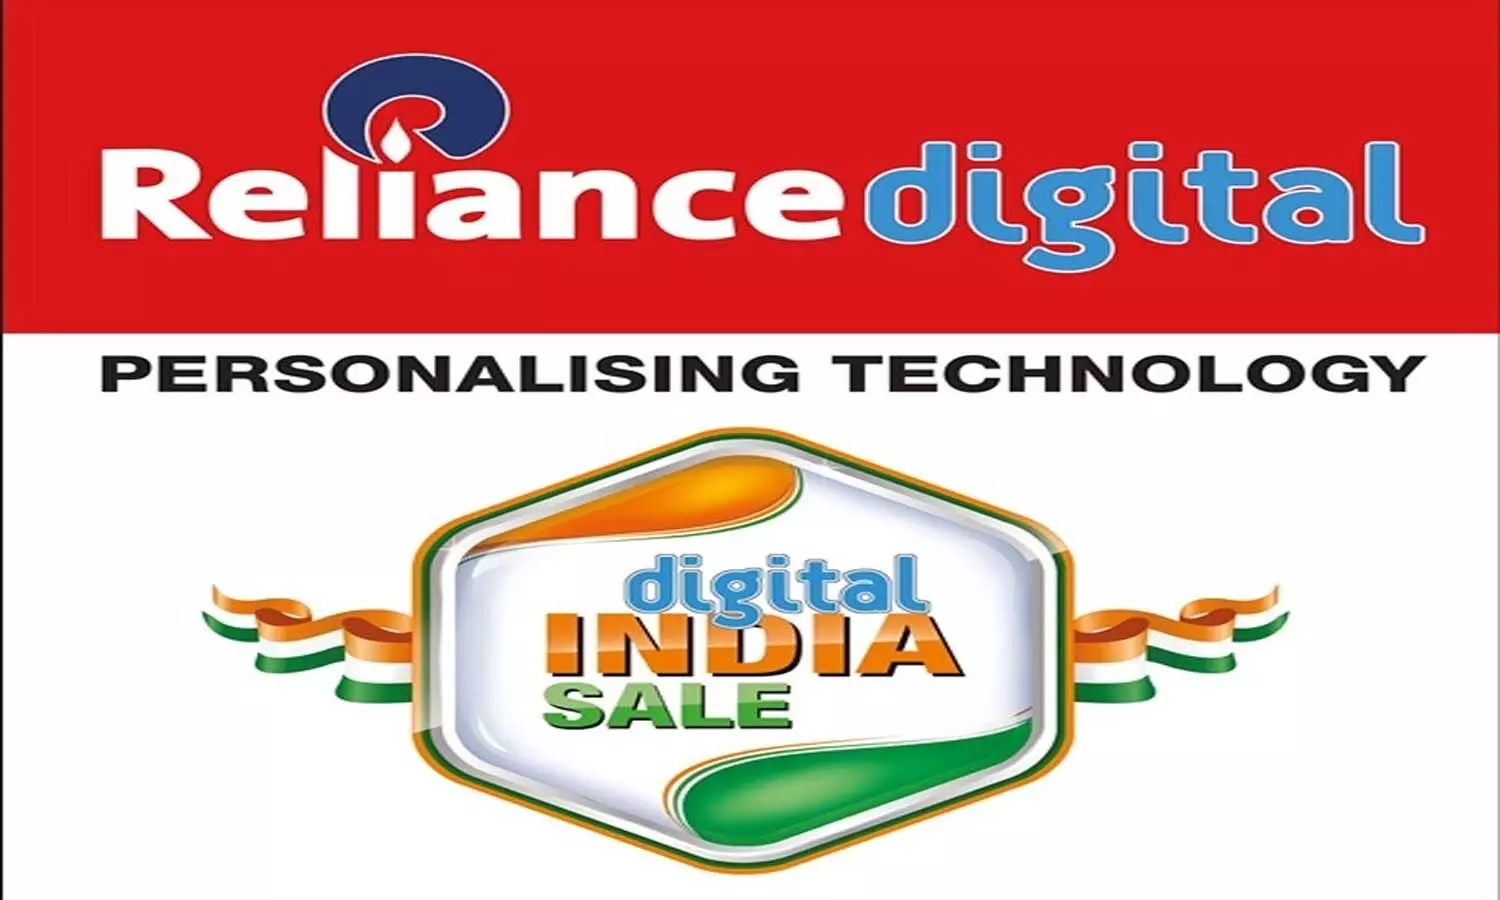 Digital India Sale is back with a bang, grab the best deals on your favorite technology at Reliance Digital